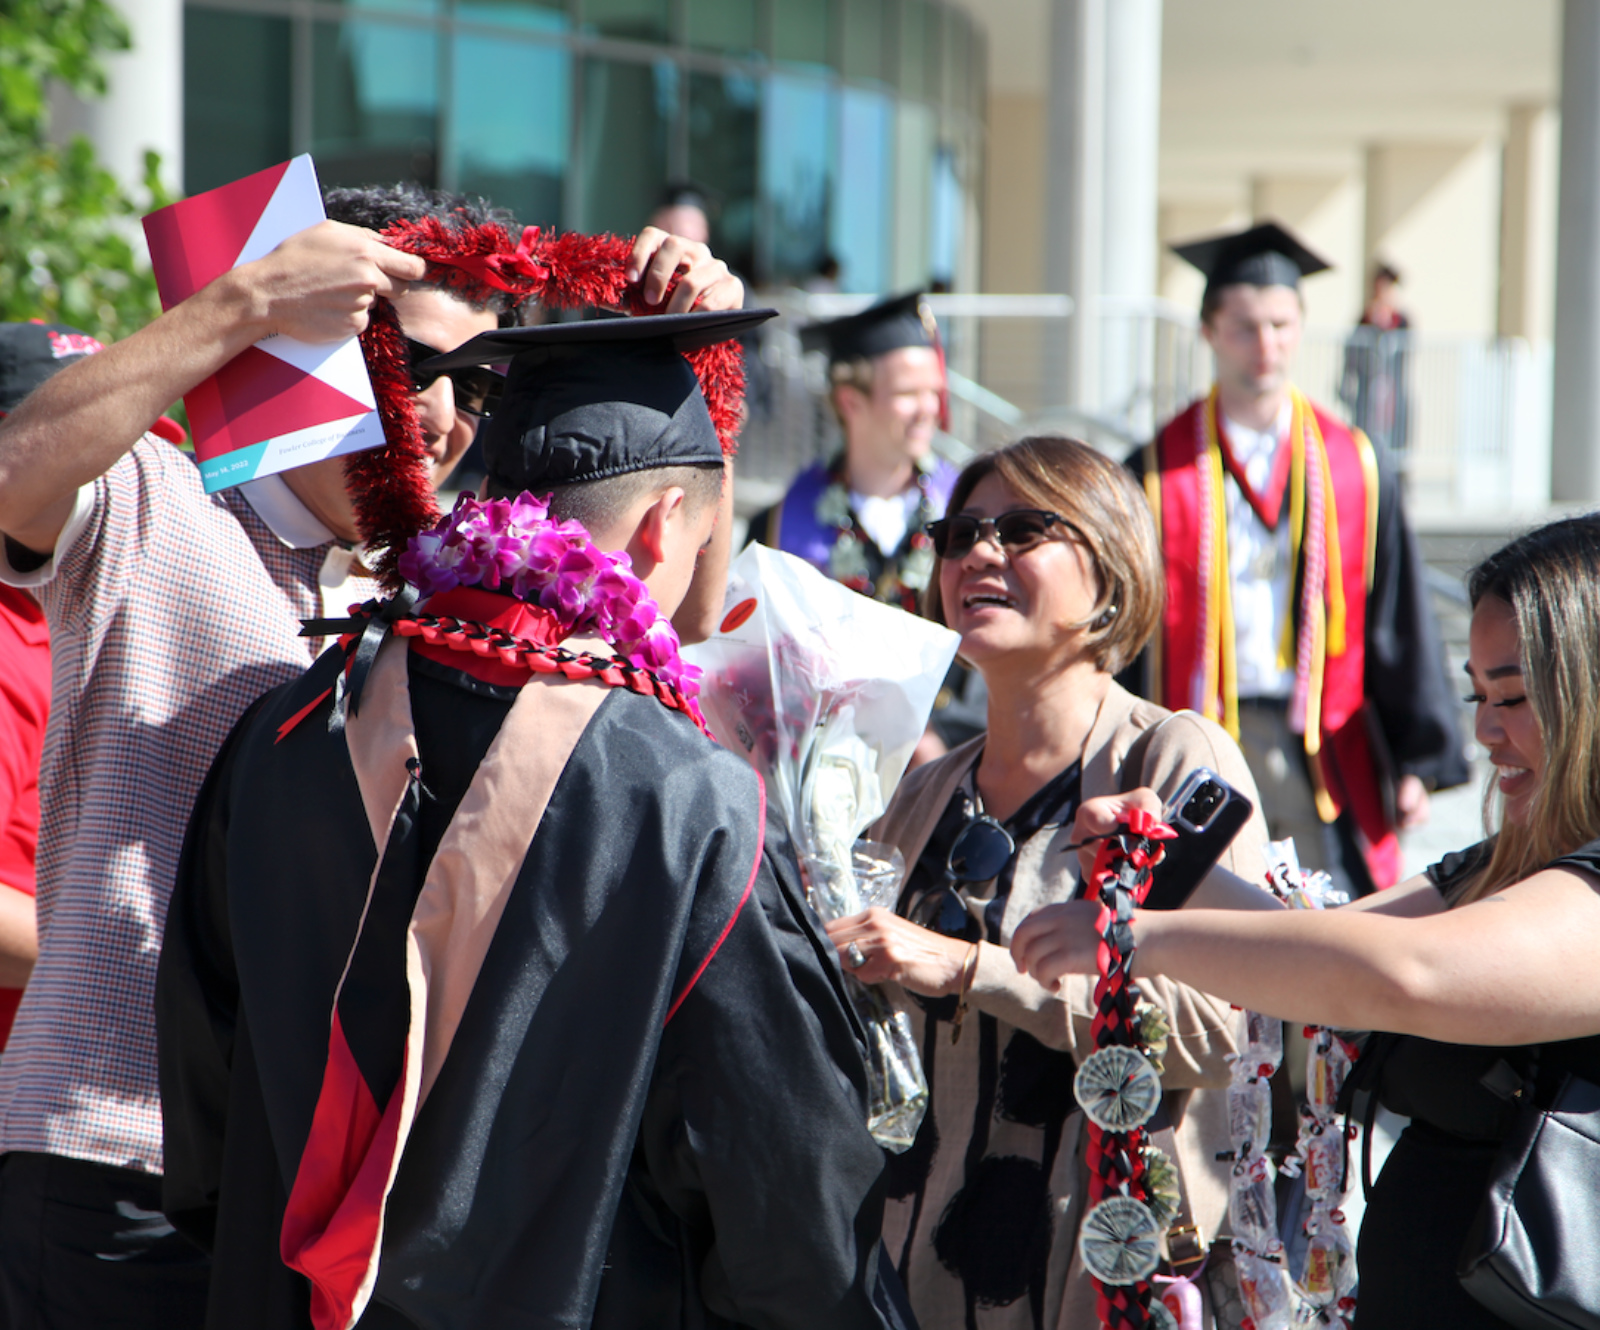 Graduate getting a lei wrapped around them.